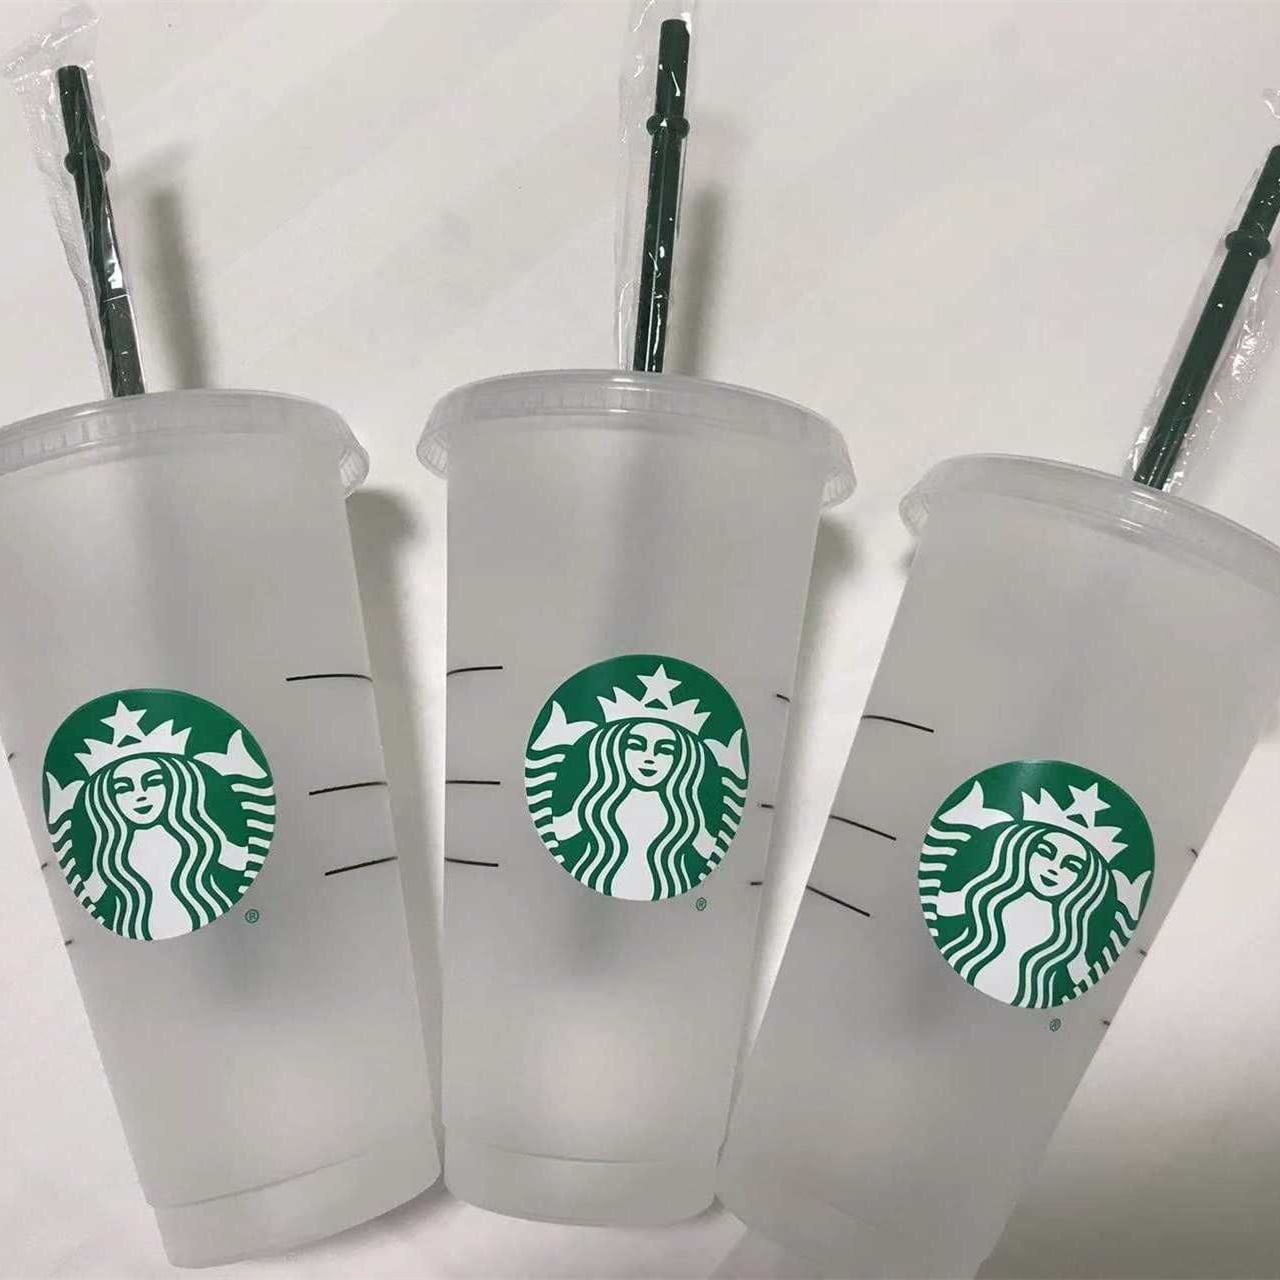 Glass Drinking Straws for Starbucks Vende Cups and Other Small